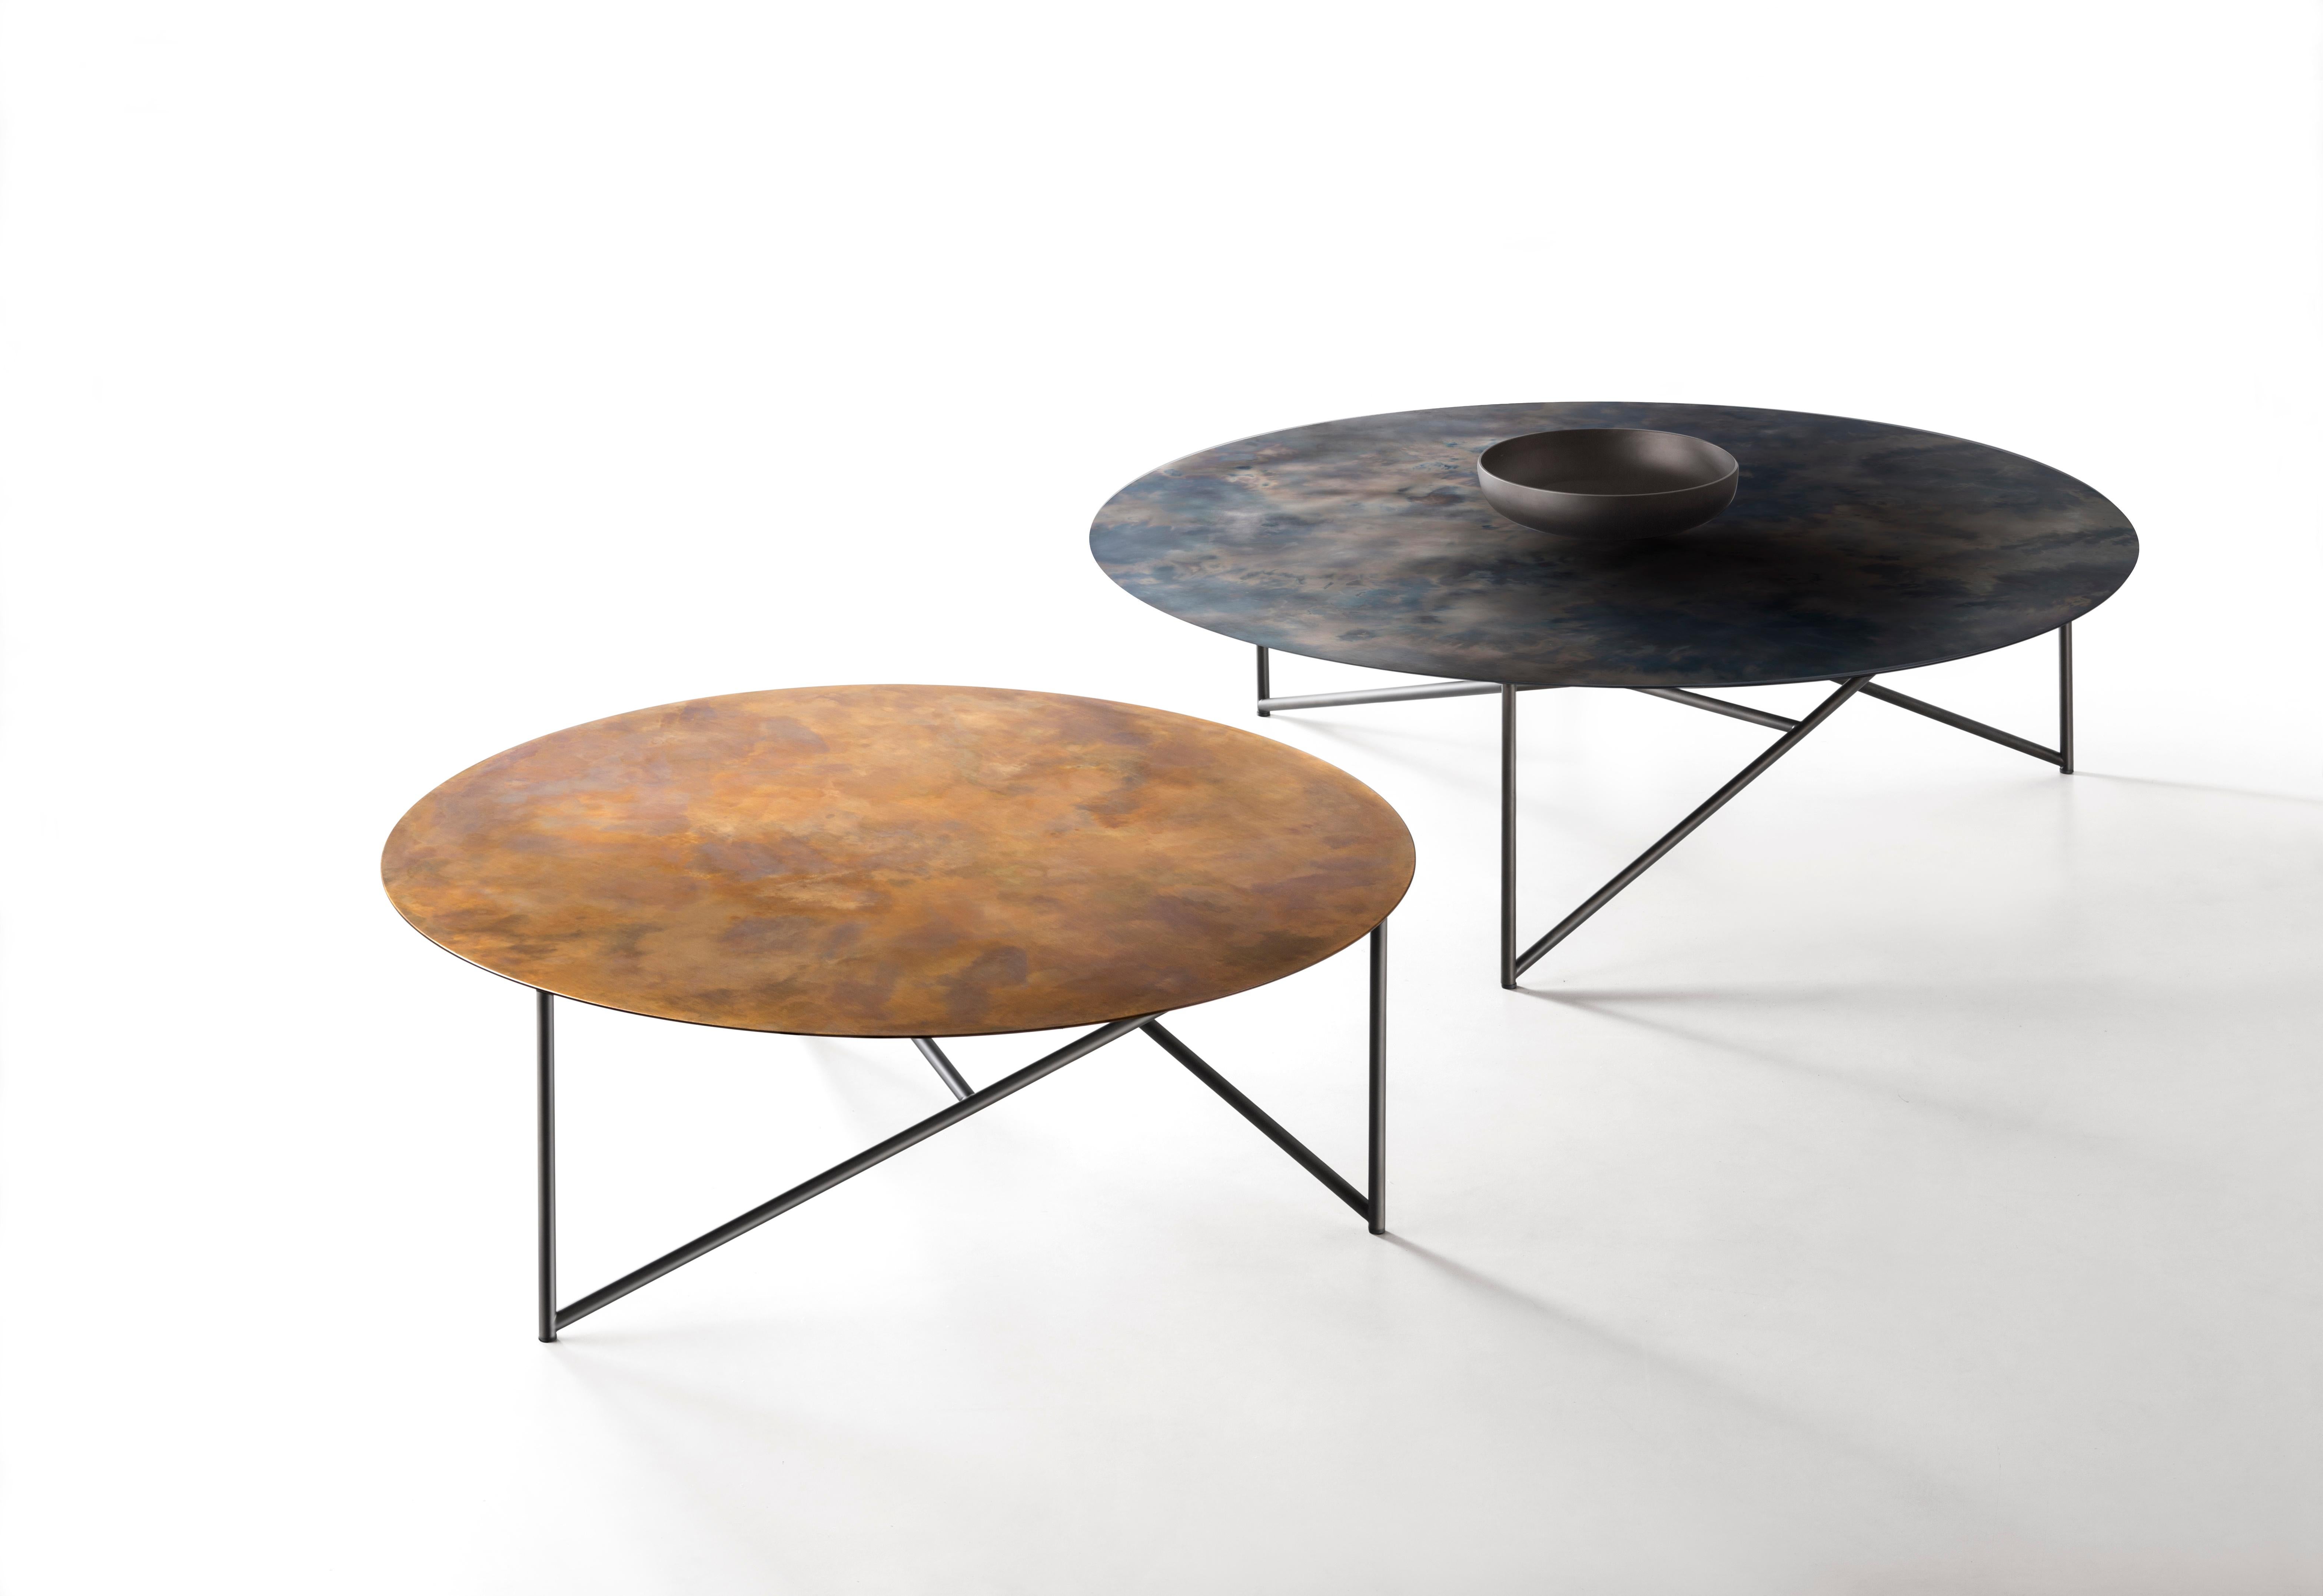 The Parsec collection of coffee tables is characterized by the interwoven tube structure which forms the base. The legs create diagonals connected by a central joint upon which the force lines converge. Attached to it are the top and centrepiece,